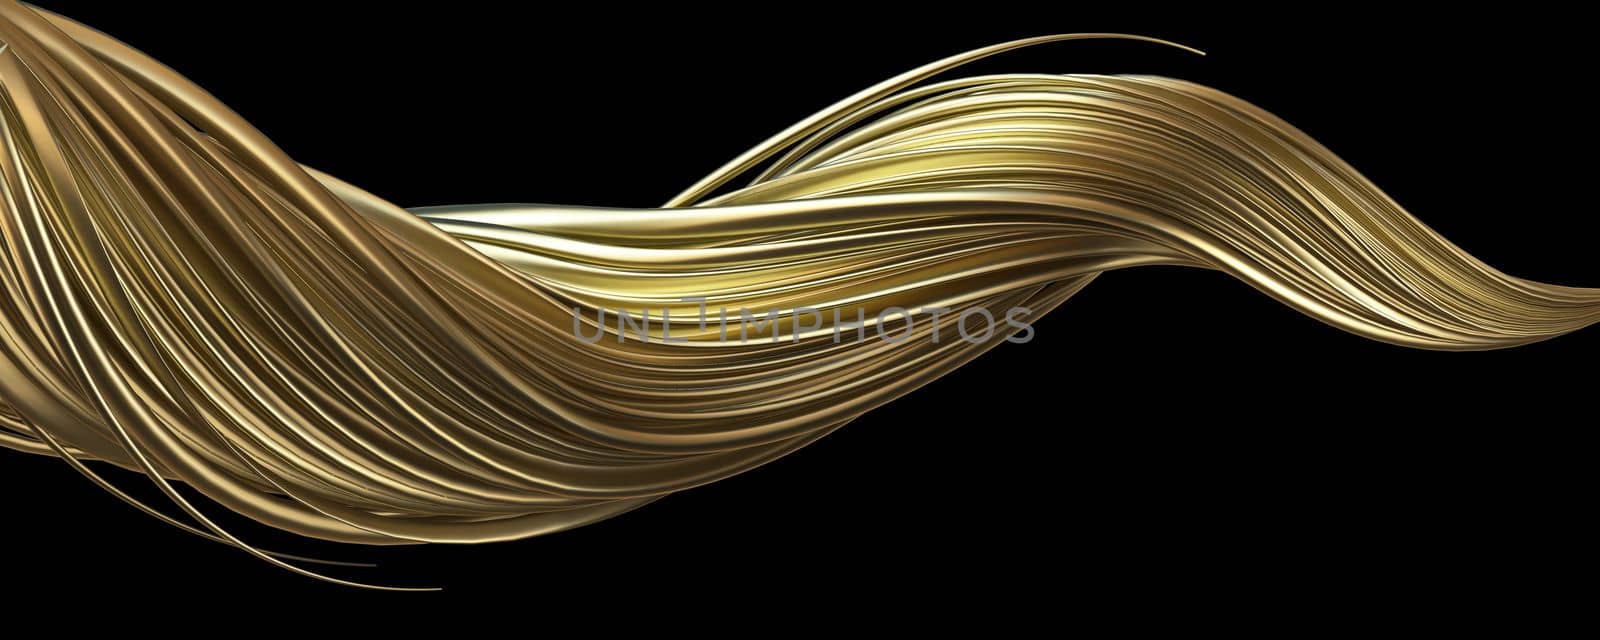 Golden hair abstract background 3D rendering illustration isolated on black background